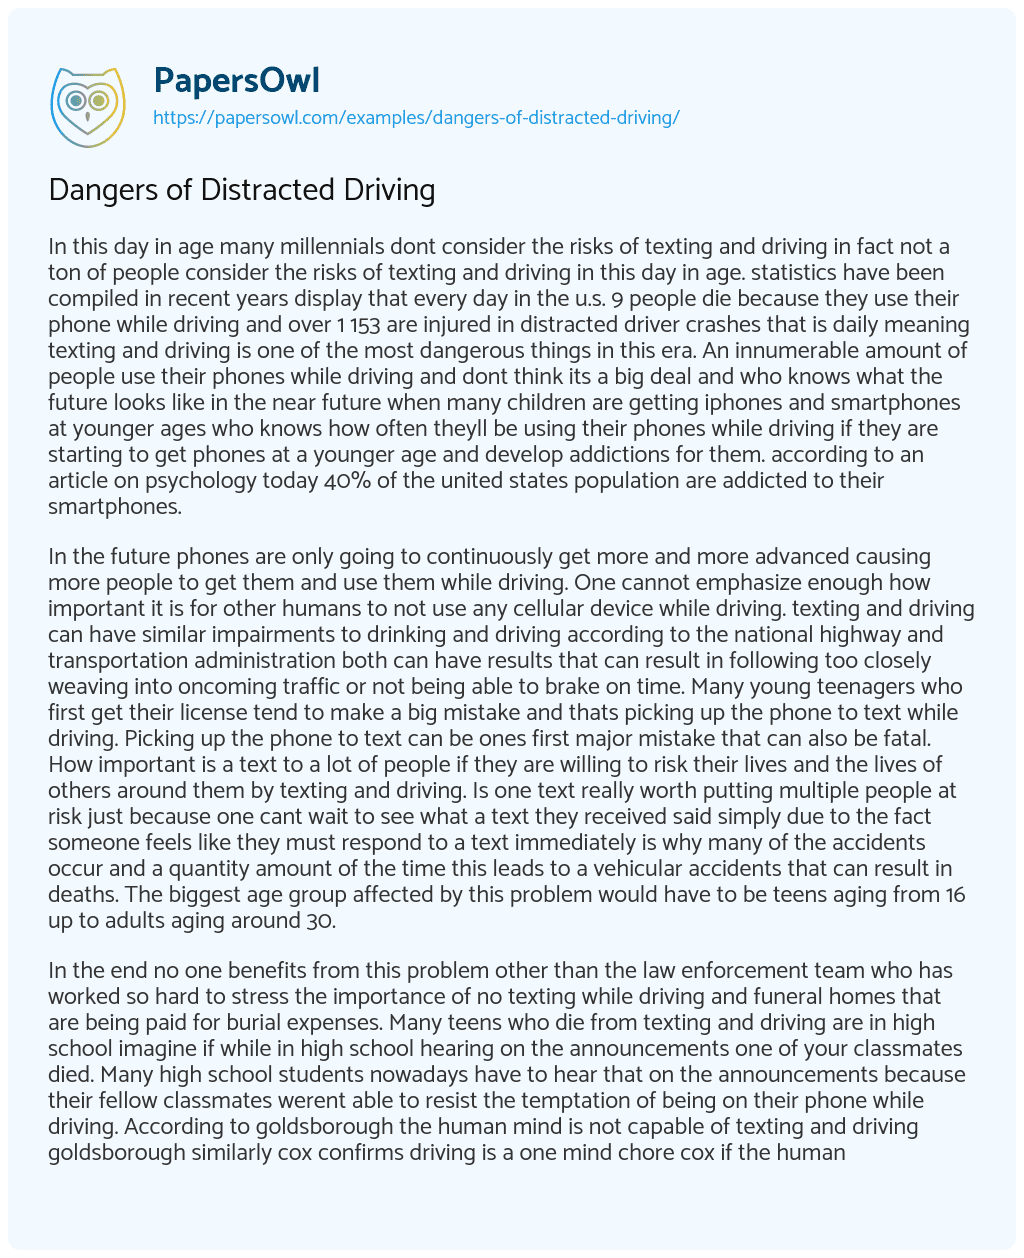 Essay on Dangers of Distracted Driving